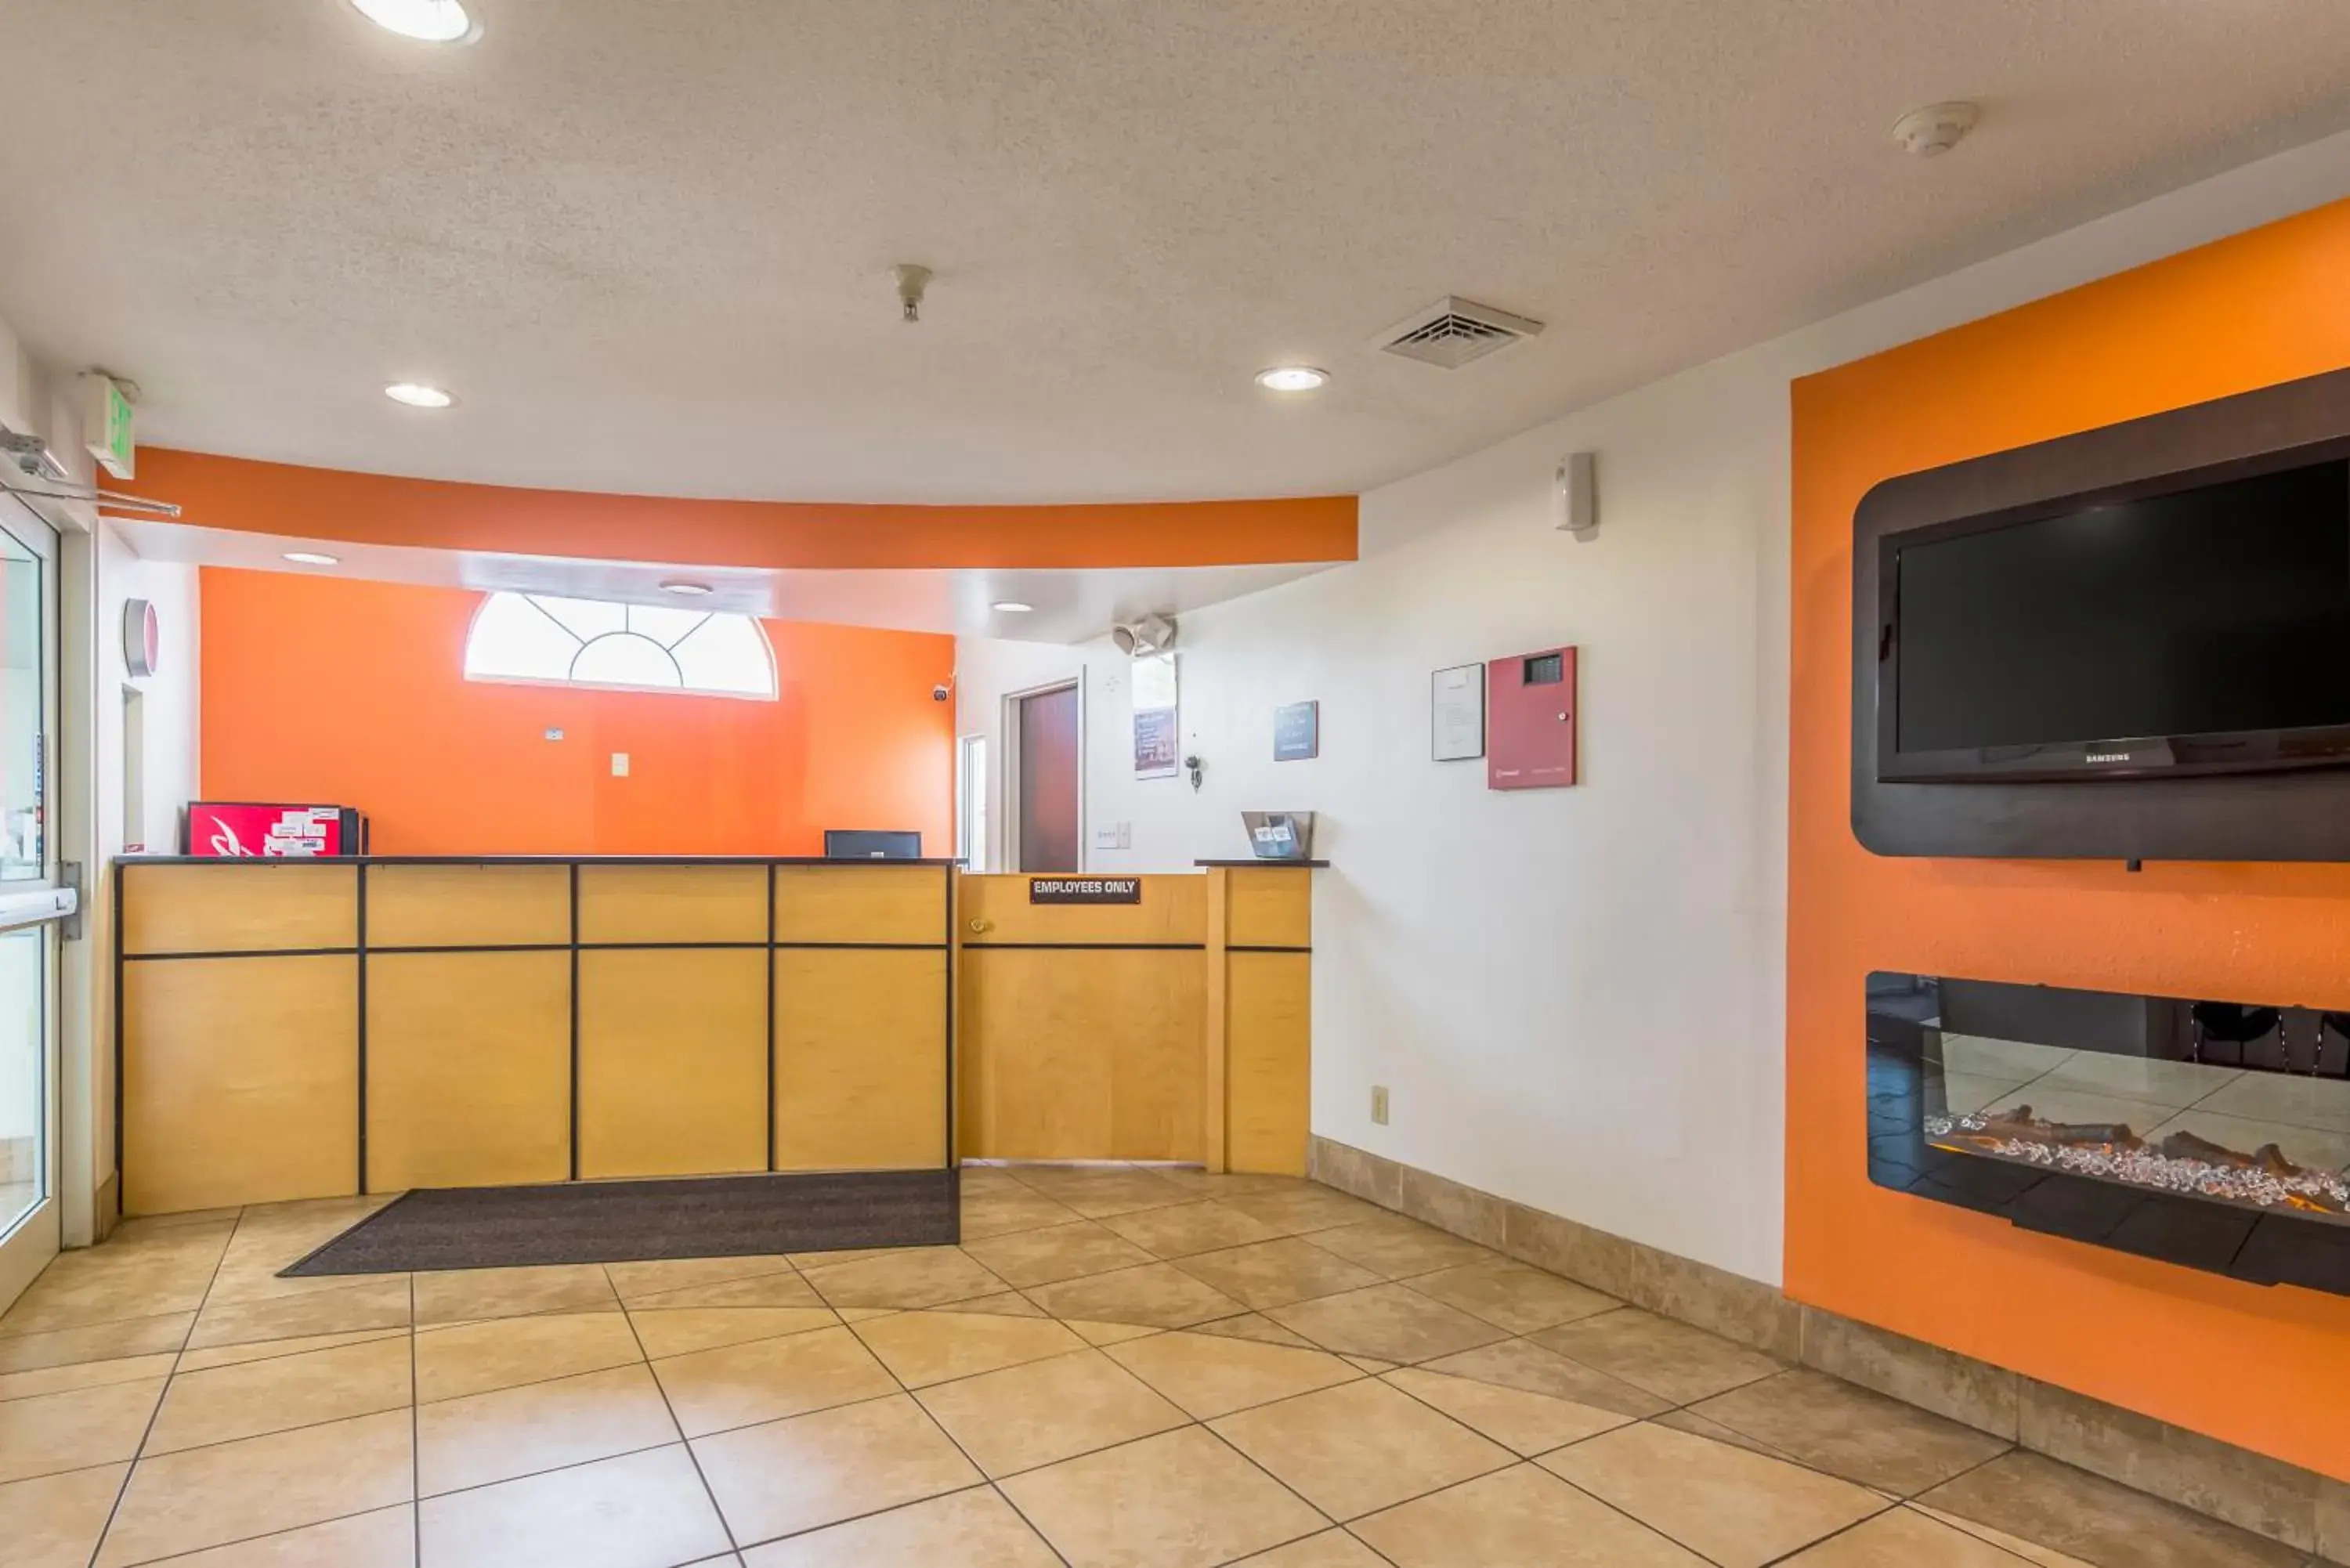 Lobby or reception in Motel 6 Indianapolis, IN